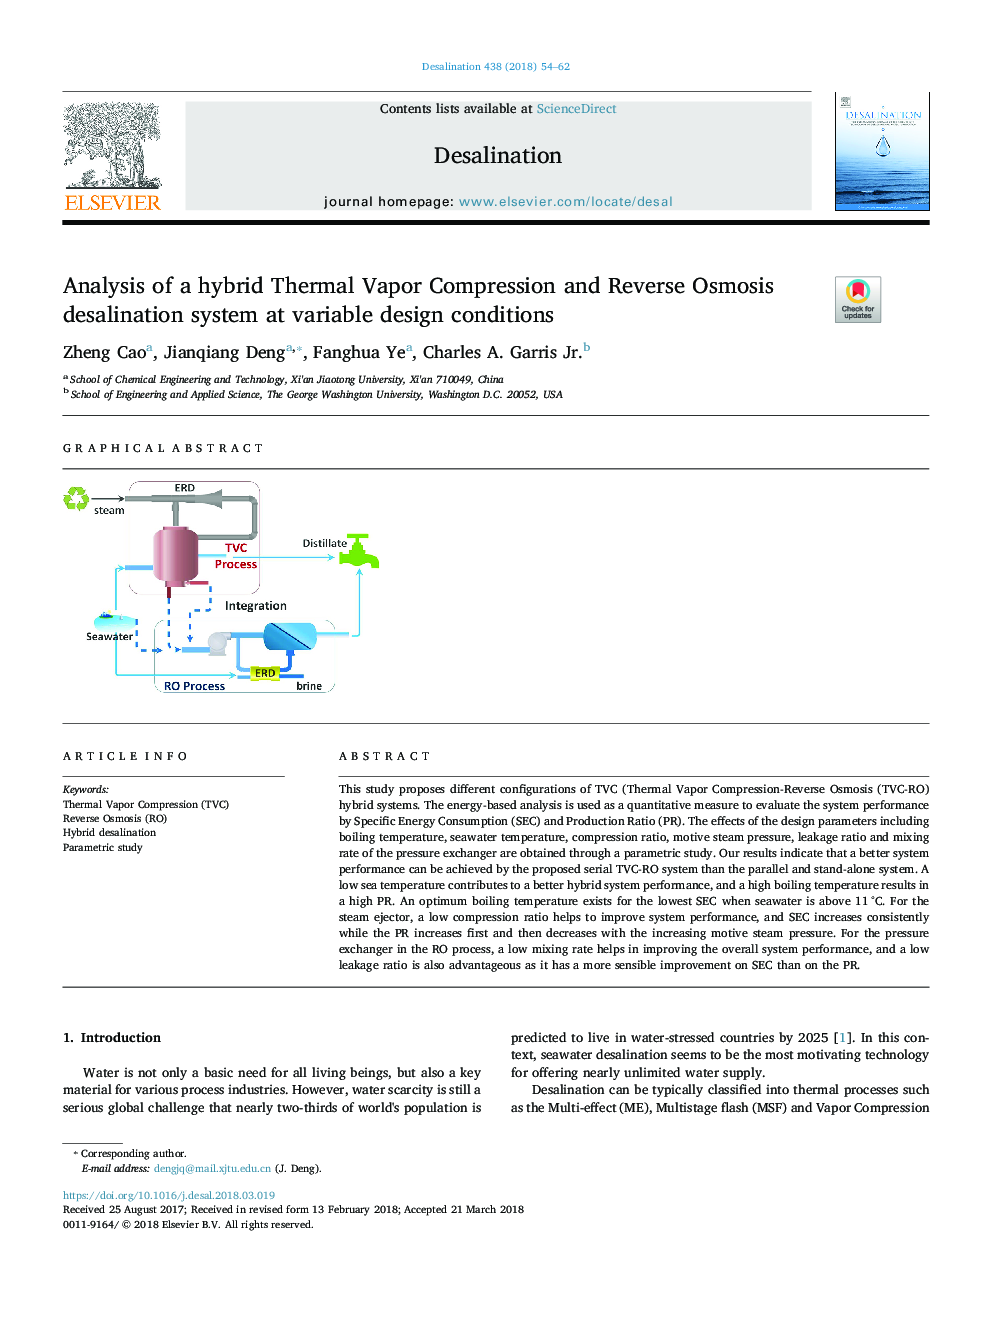 Analysis of a hybrid Thermal Vapor Compression and Reverse Osmosis desalination system at variable design conditions